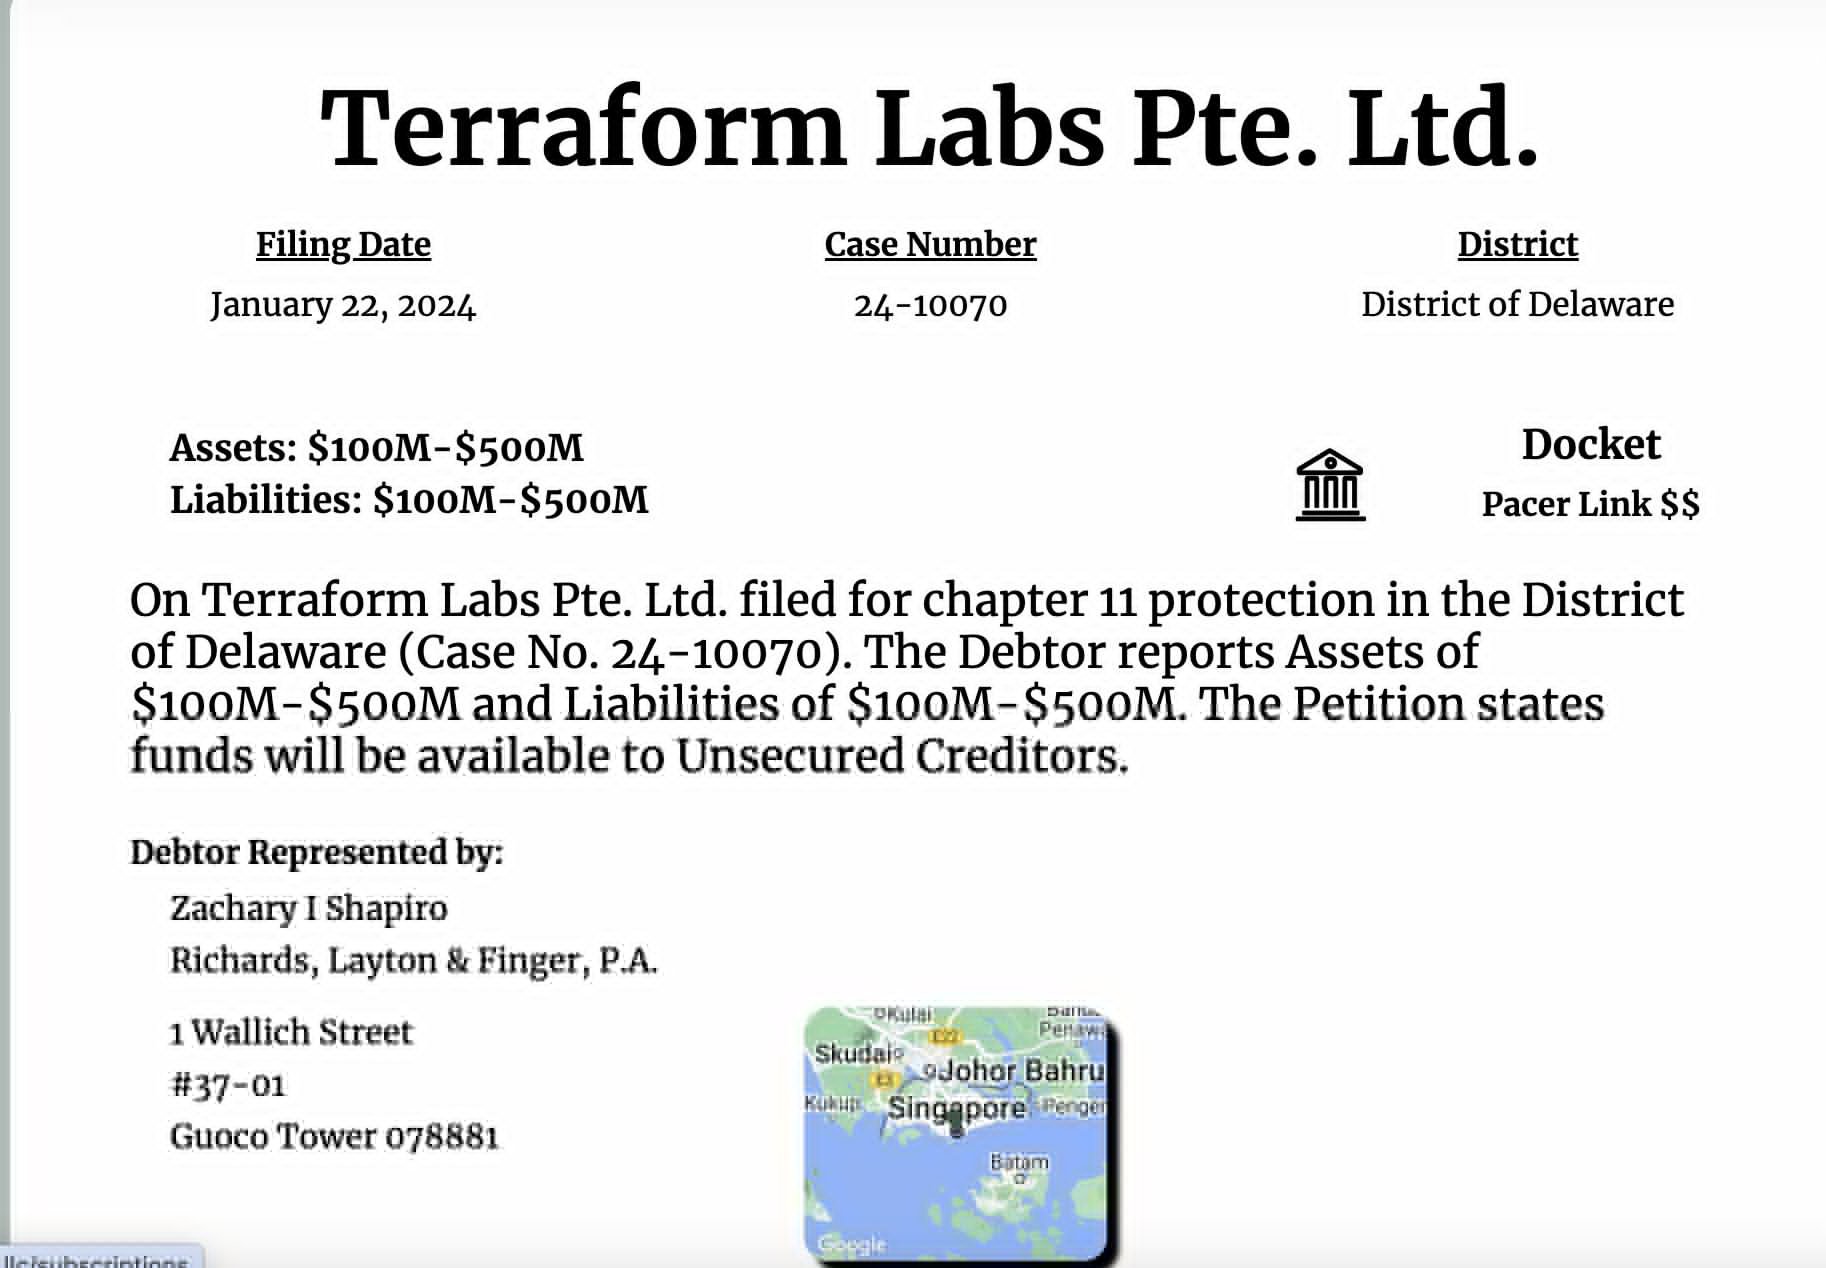 terraform labs files for chapter 11 bankruptcy